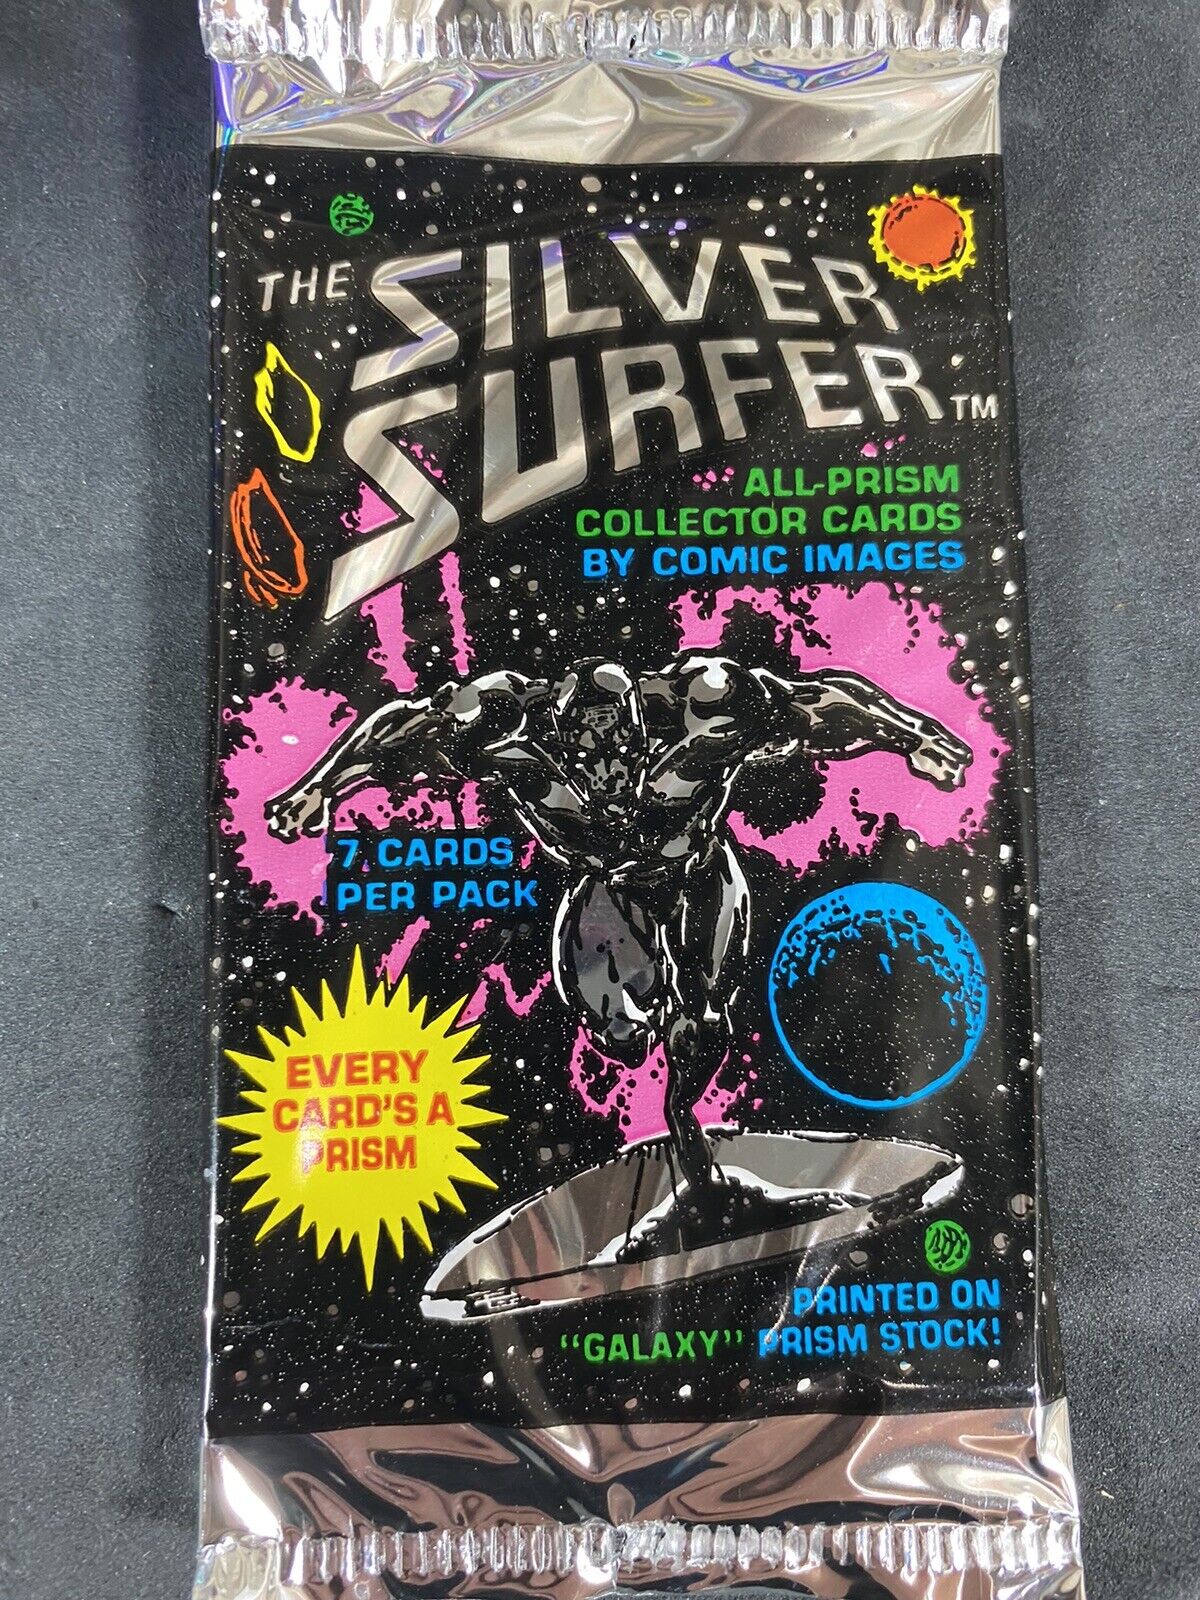 1992 The Silver Surfer Trading Cards All Prism by Comics Images 1 Sealed Pack